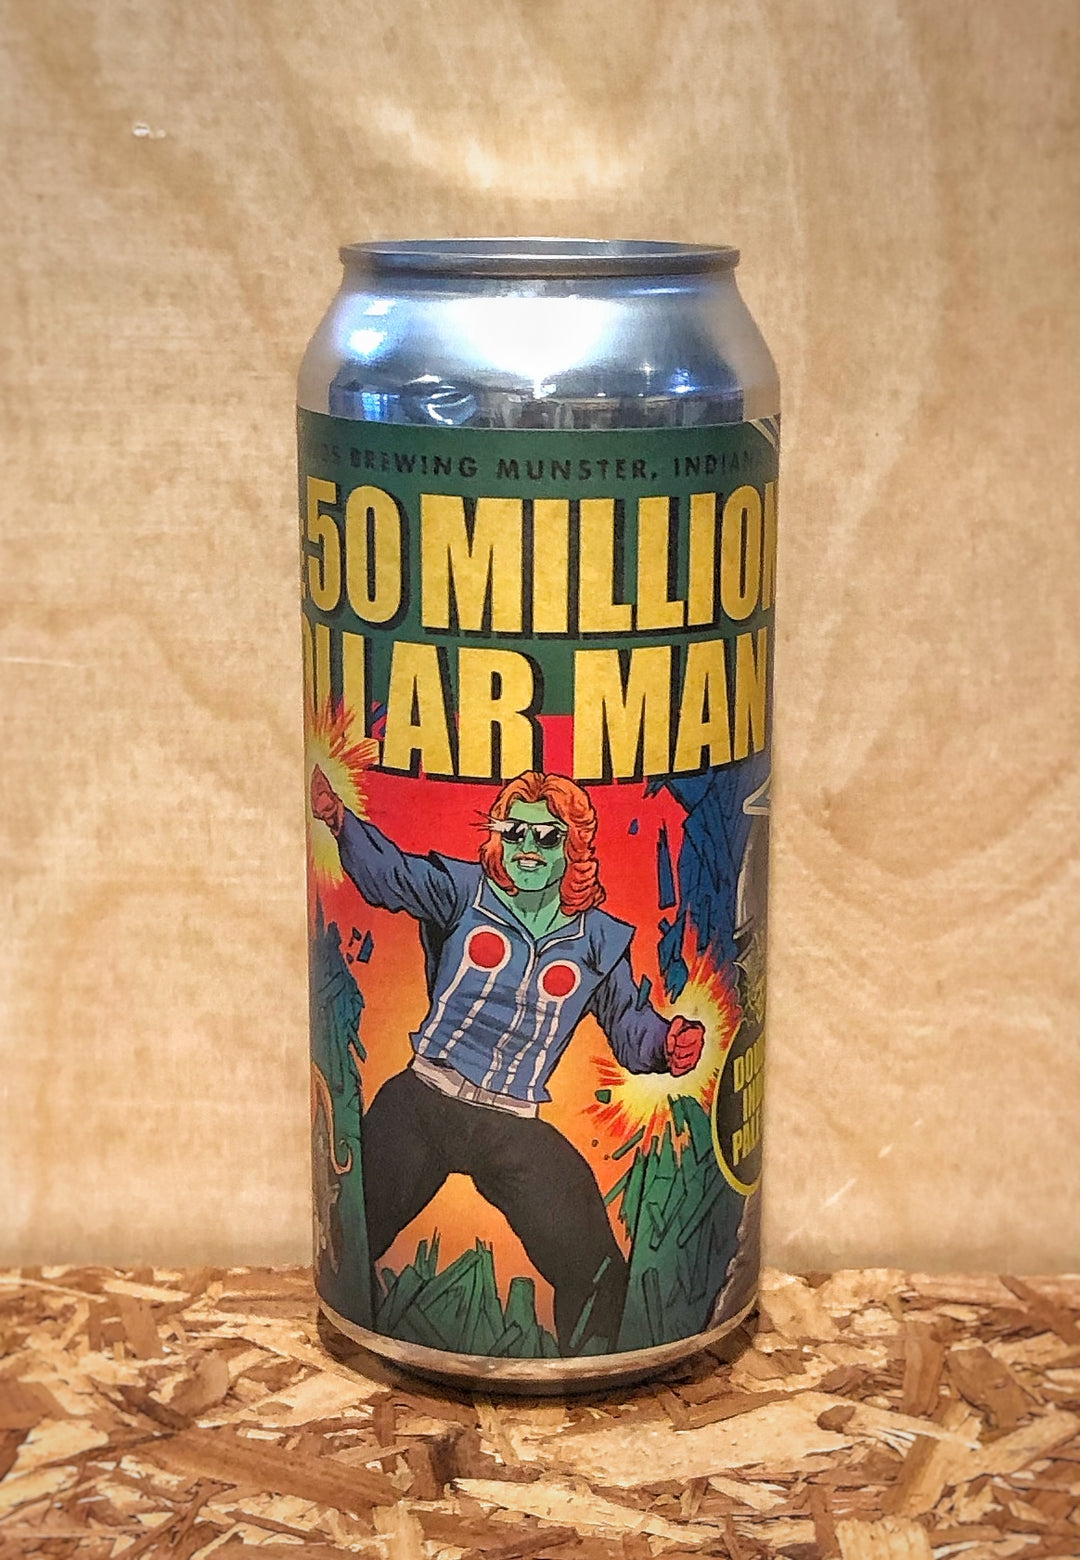 3 Floyds 'The 50 Million Dollar Man' Double IPA (Munster, IN)